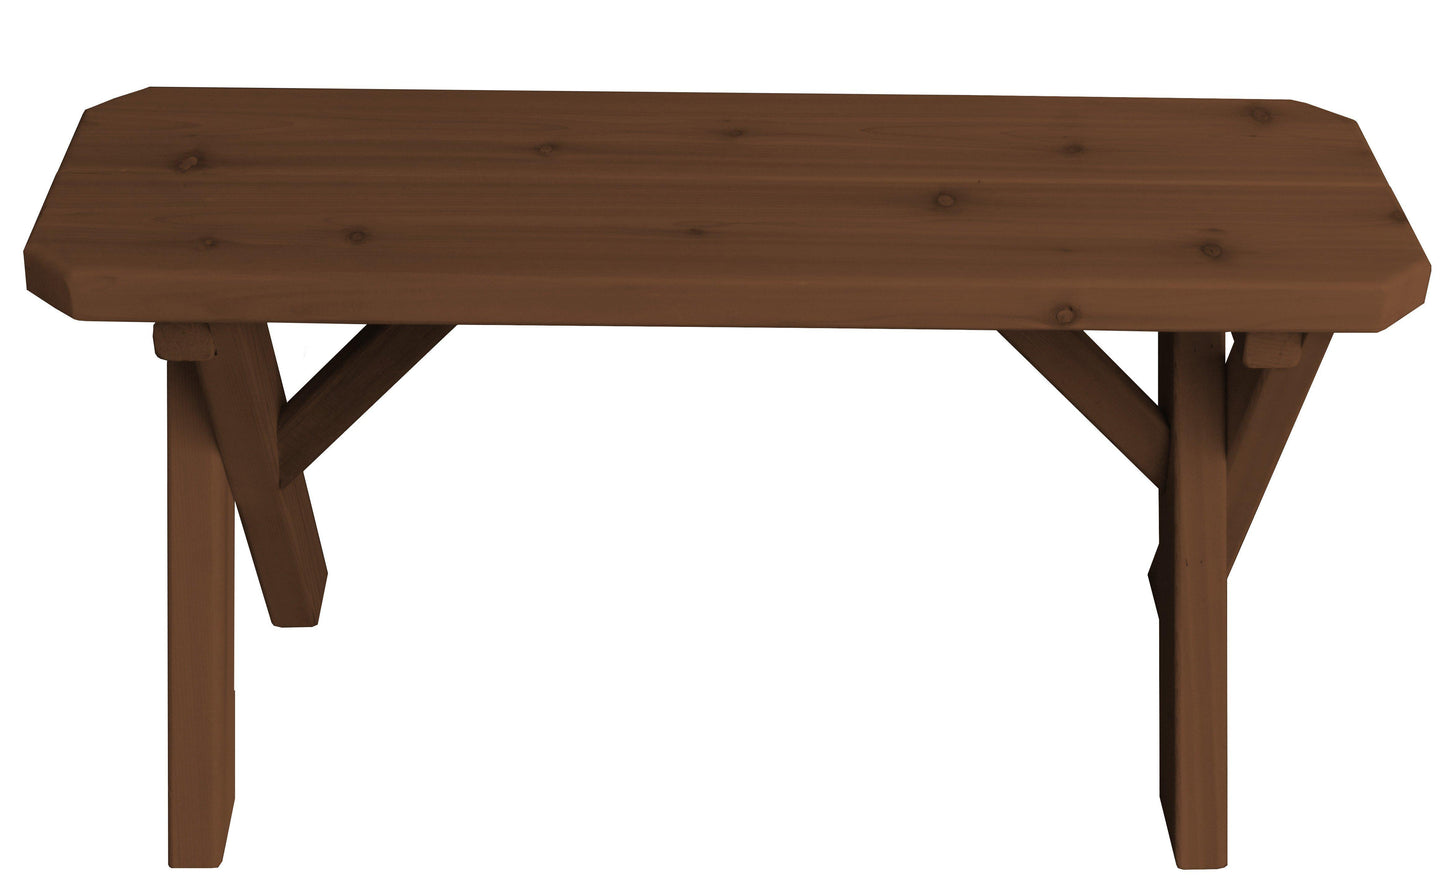 A&L FURNITURE CO. Western Red Cedar 23" Crossleg Bench Only - LEAD TIME TO SHIP 2 WEEKS